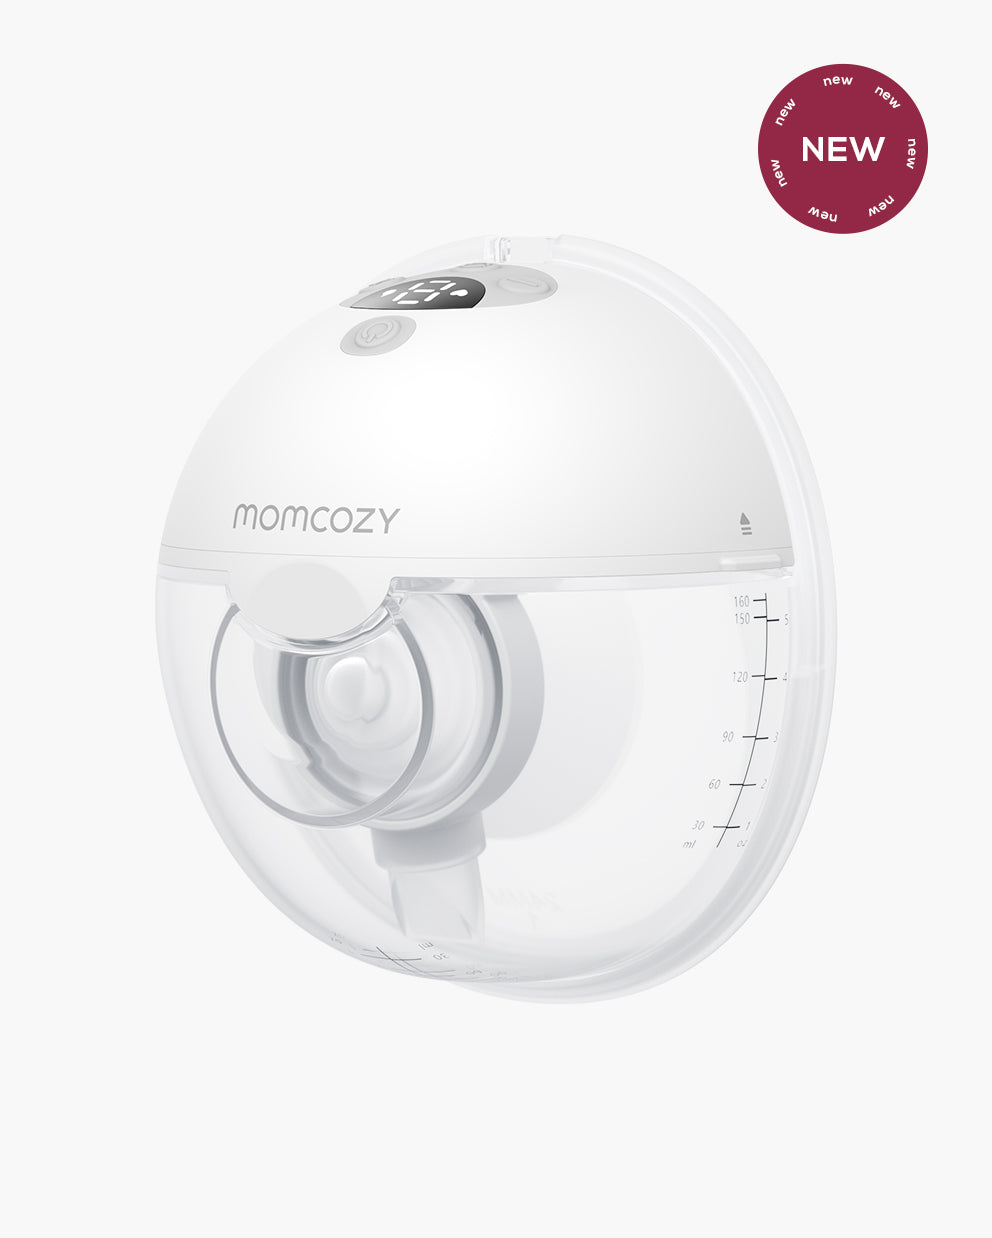 MomCozy M5 Wearable Breast Pumps Grey Two Pumps Hands-Free New